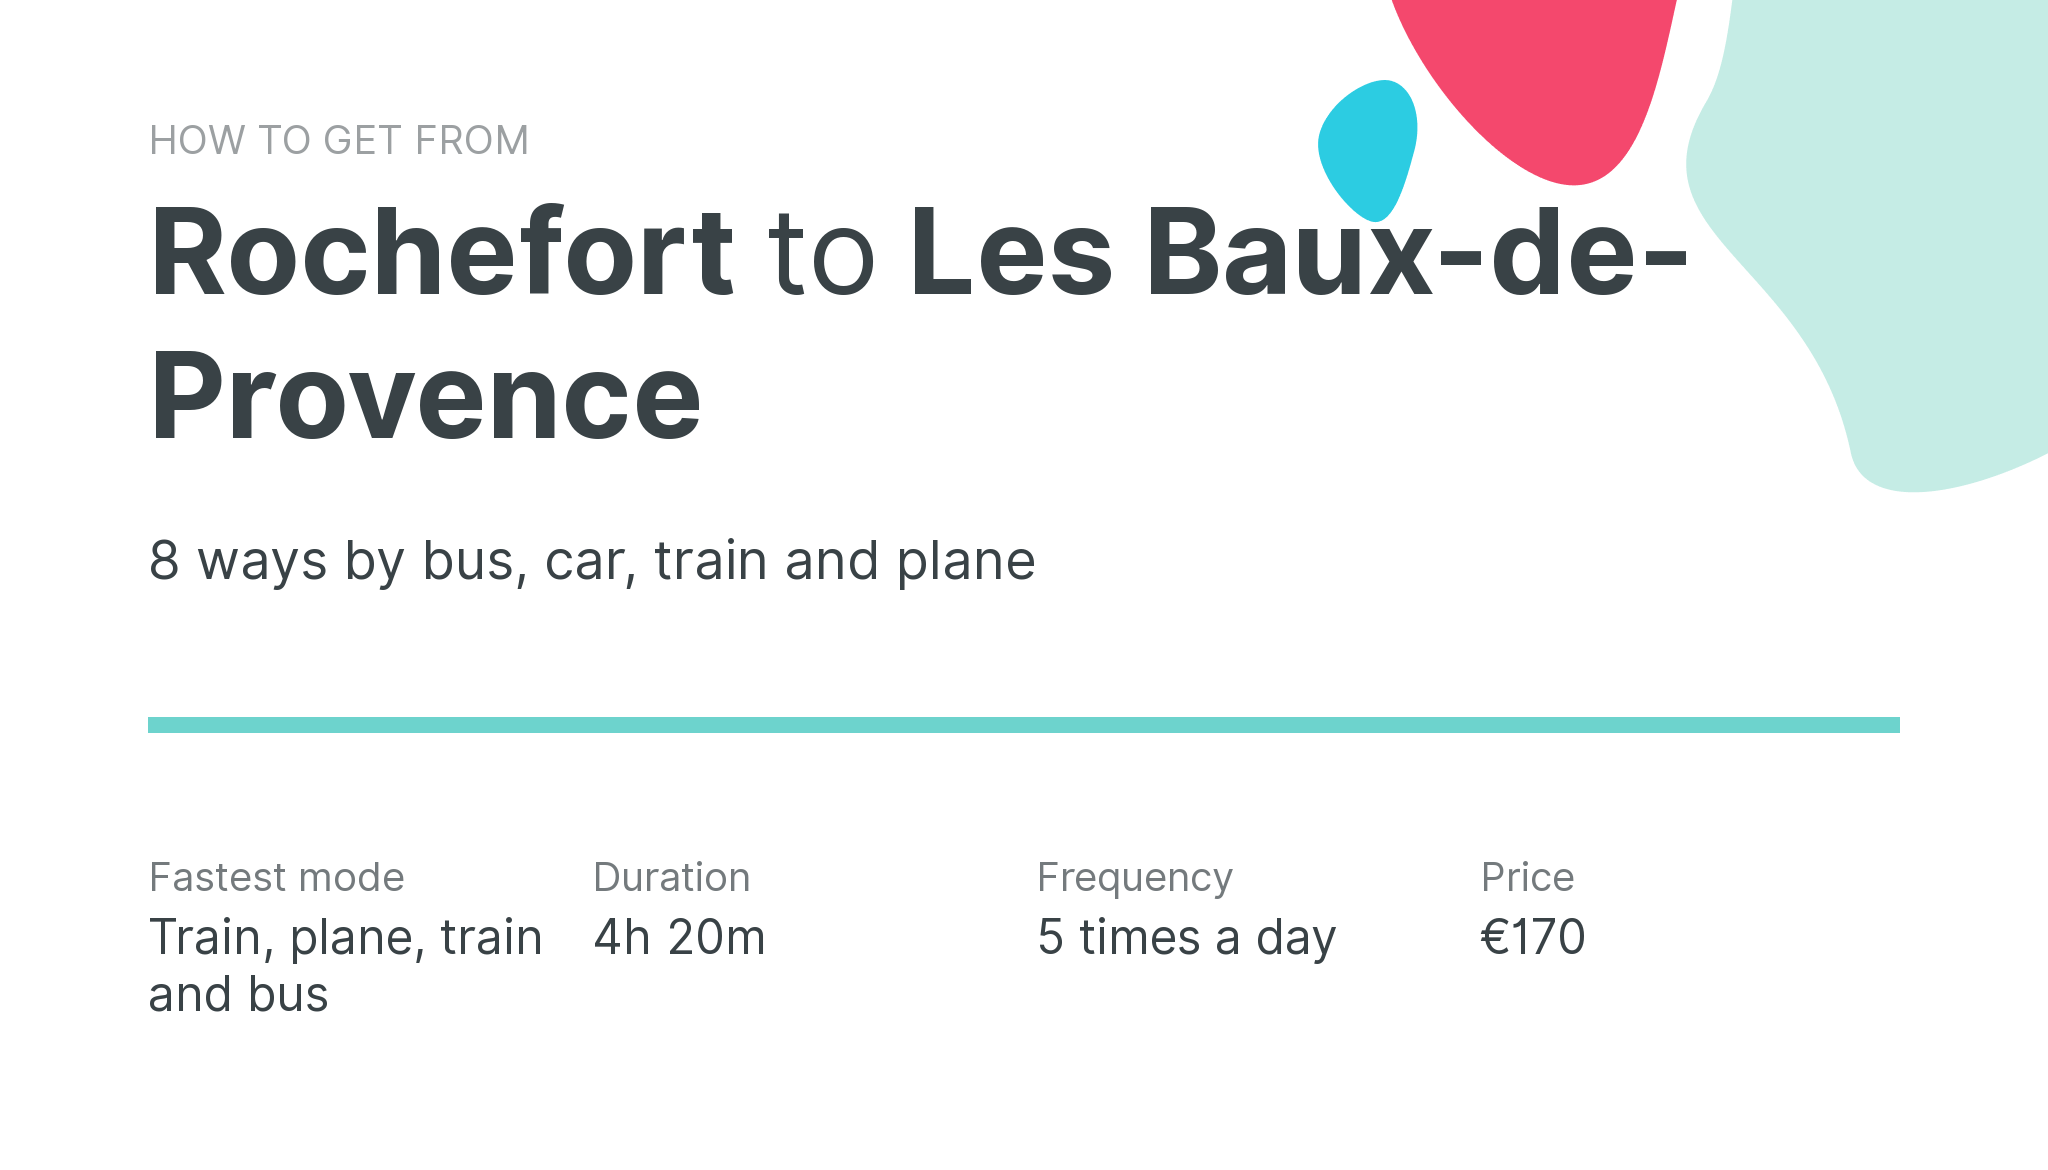 How do I get from Rochefort to Les Baux-de-Provence